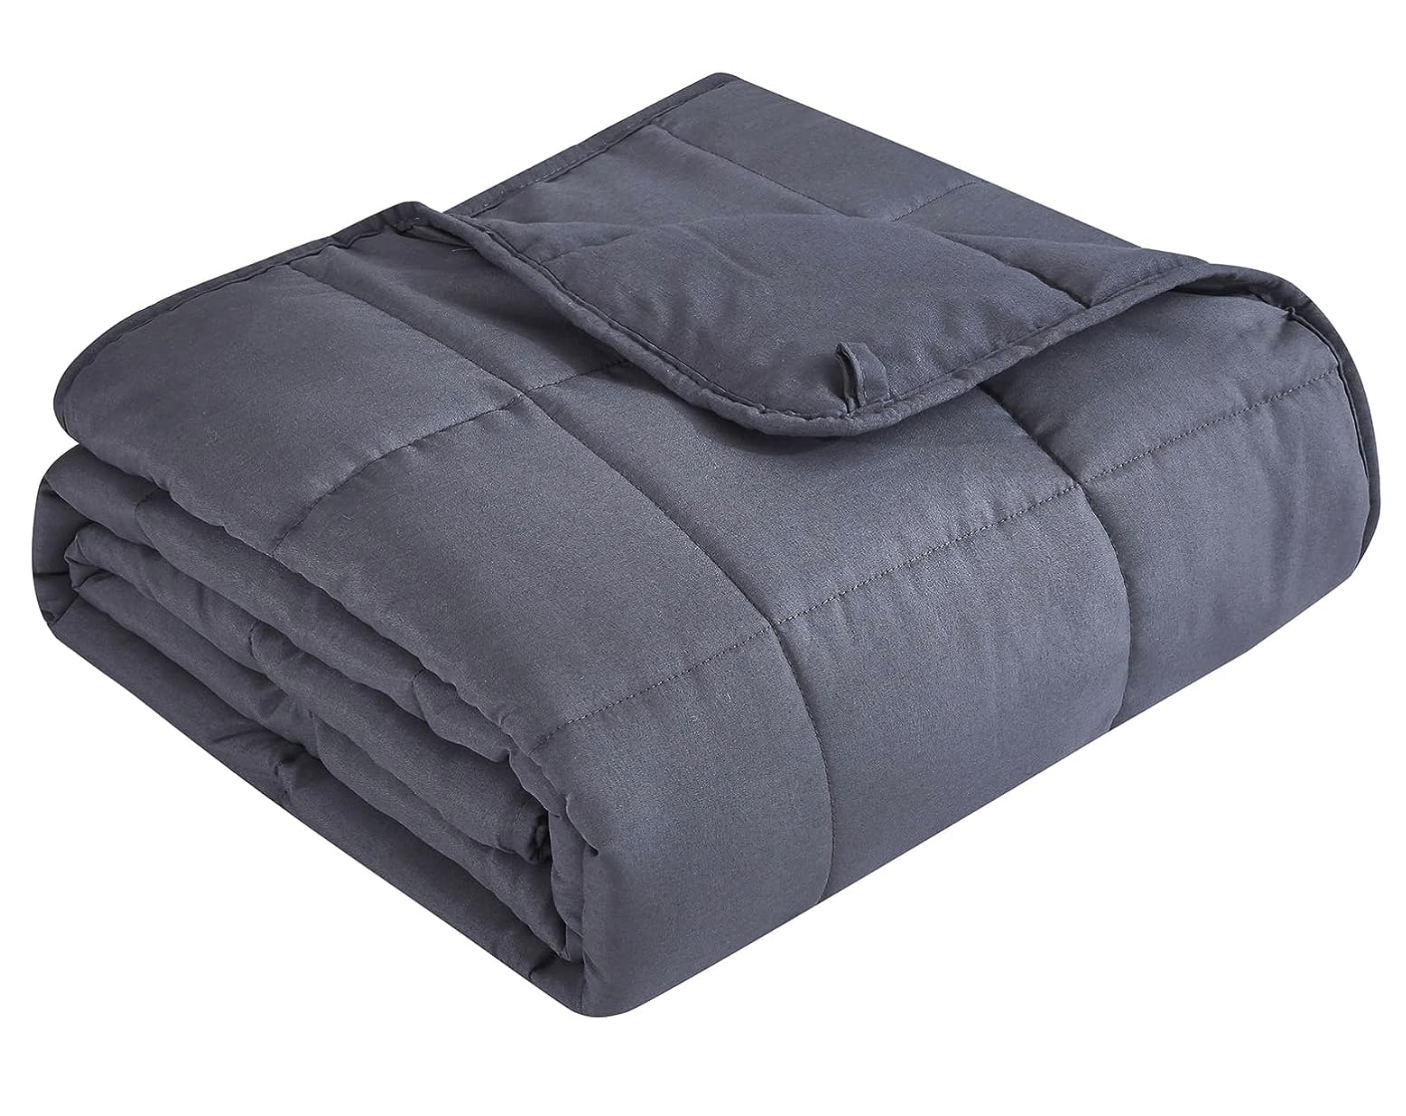 Topcee Weighted Blanket (Copy)